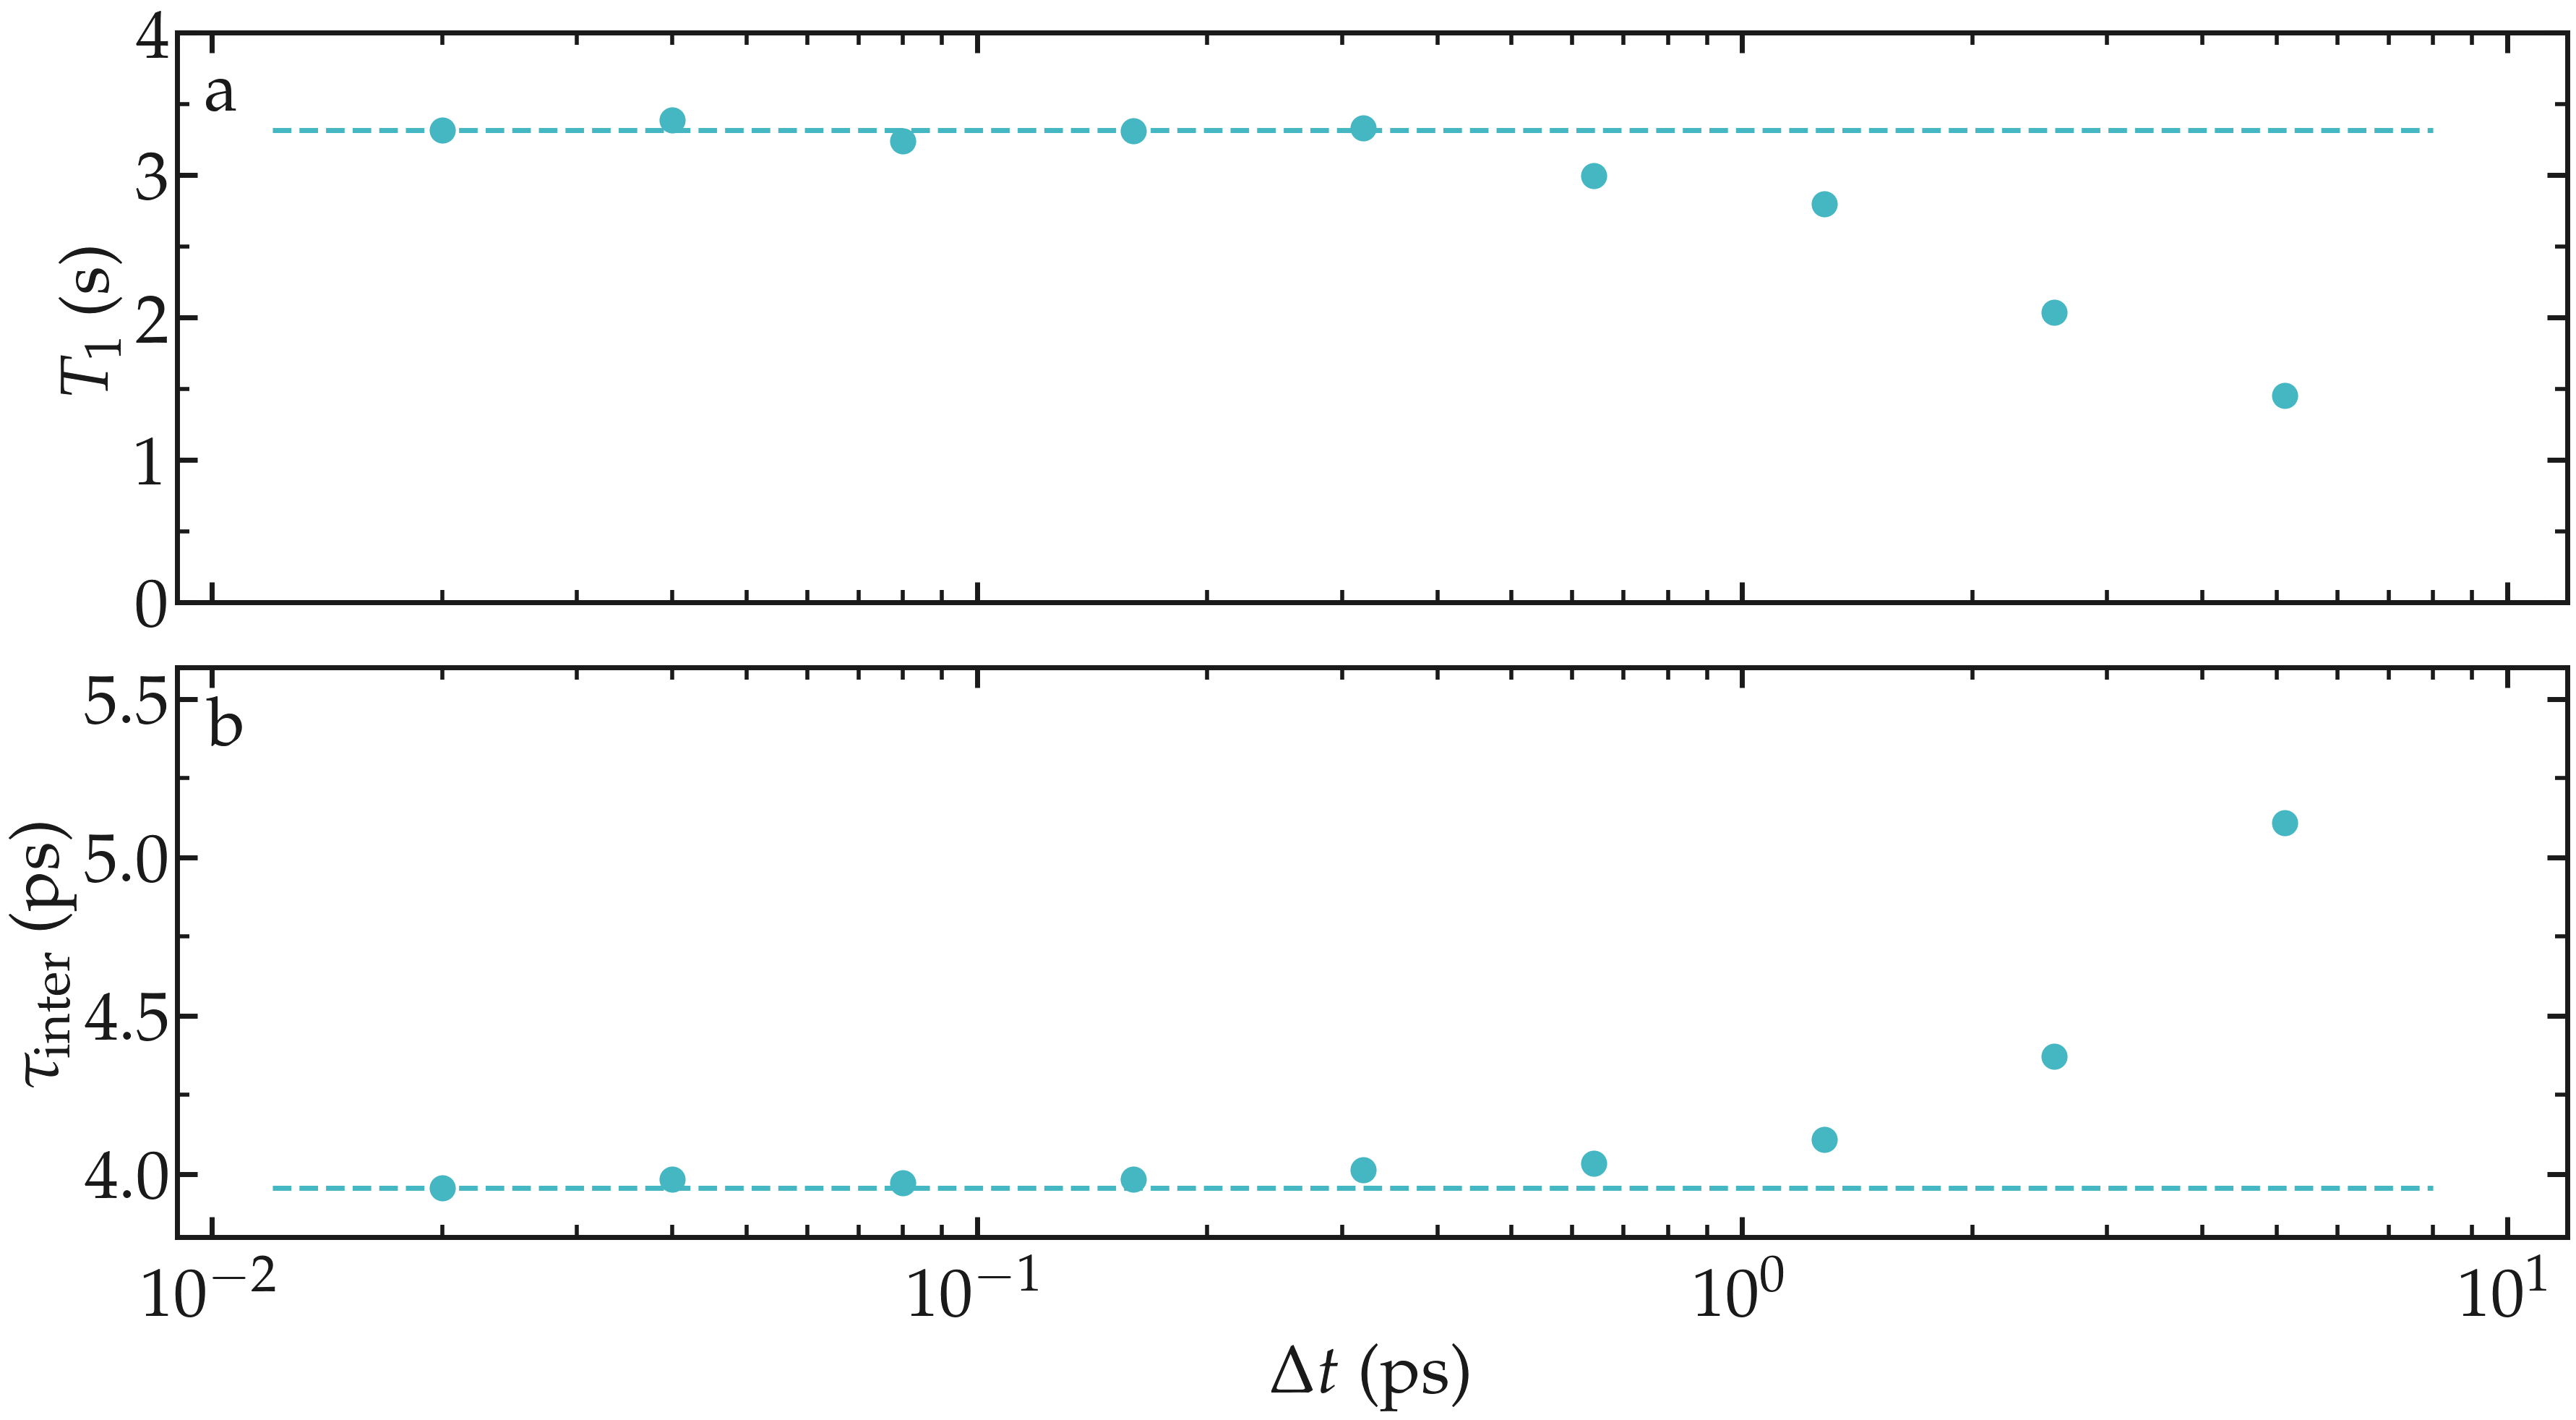 NMR results obtained from the LAMMPS simulation of water